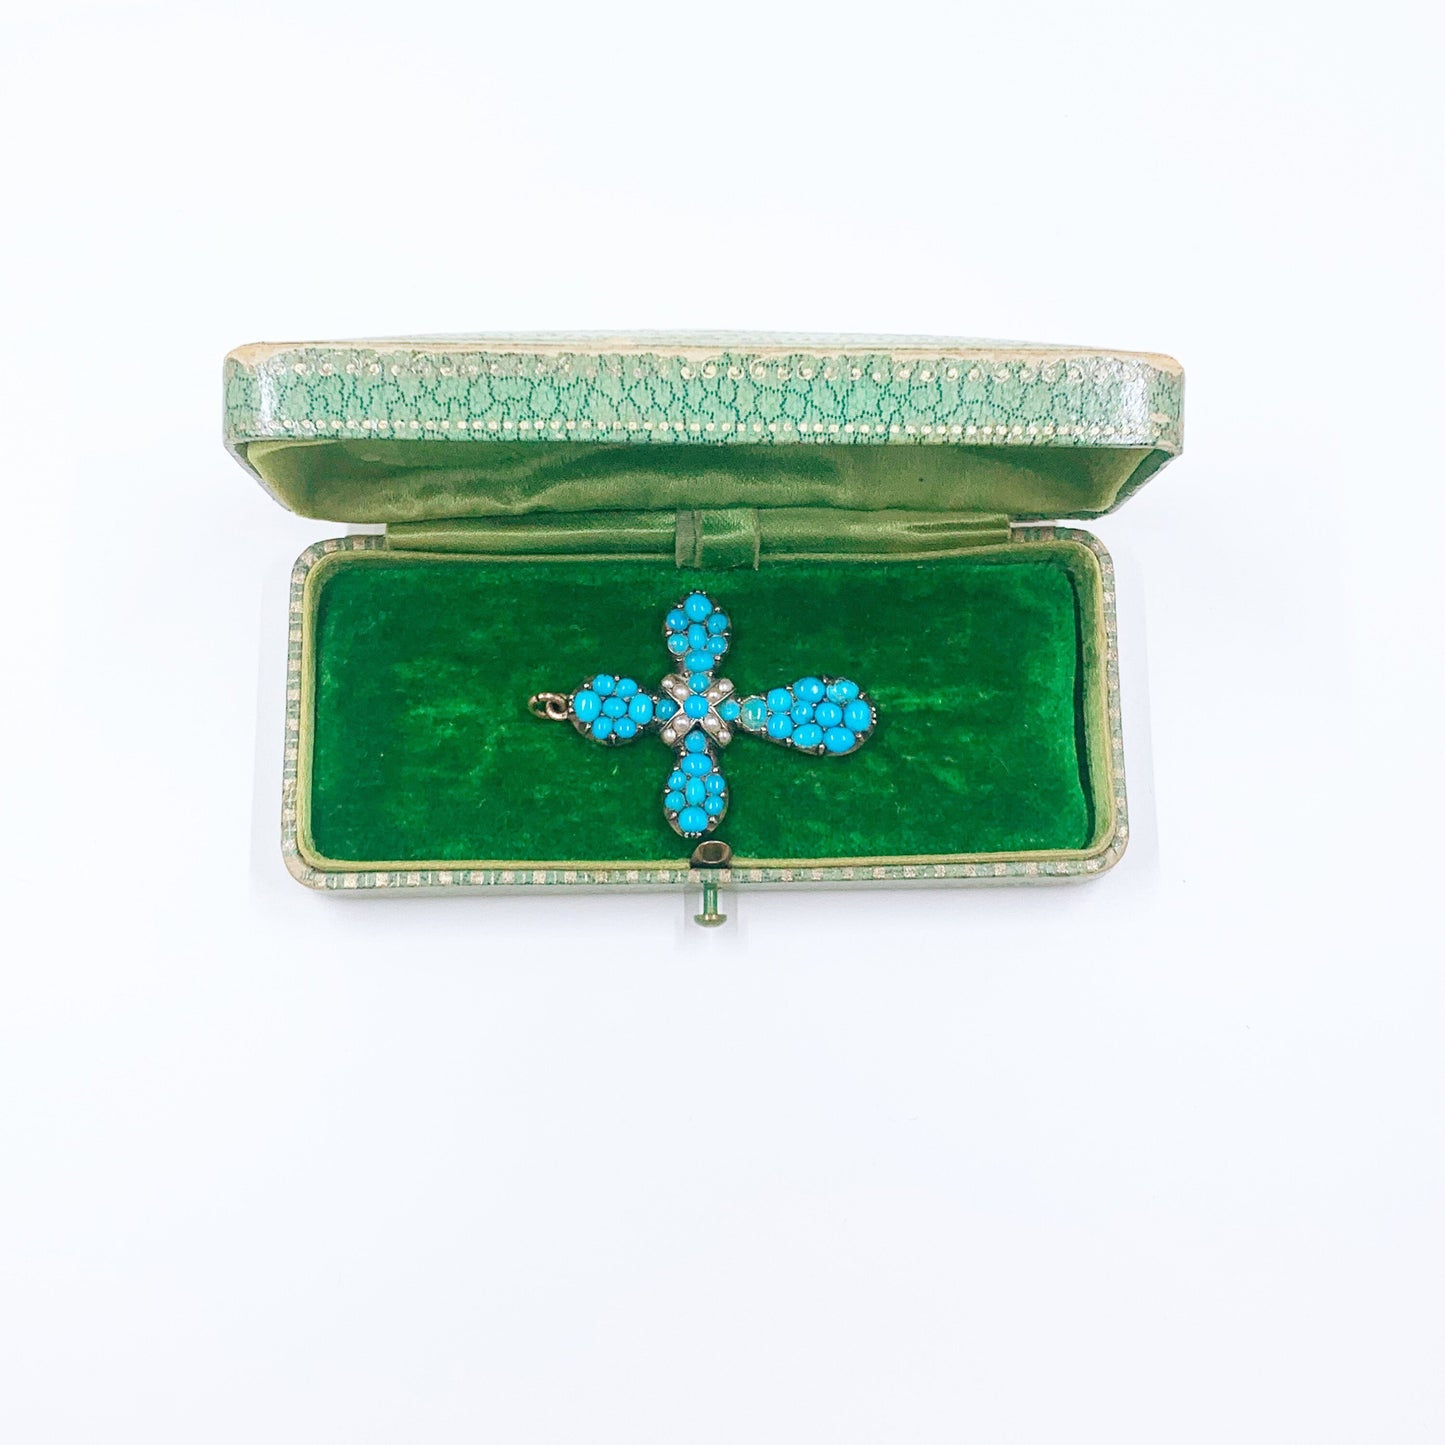 Victorian Turquoise and Seed Pearl Cross | Antique Gold Turquoise Cross Pendant